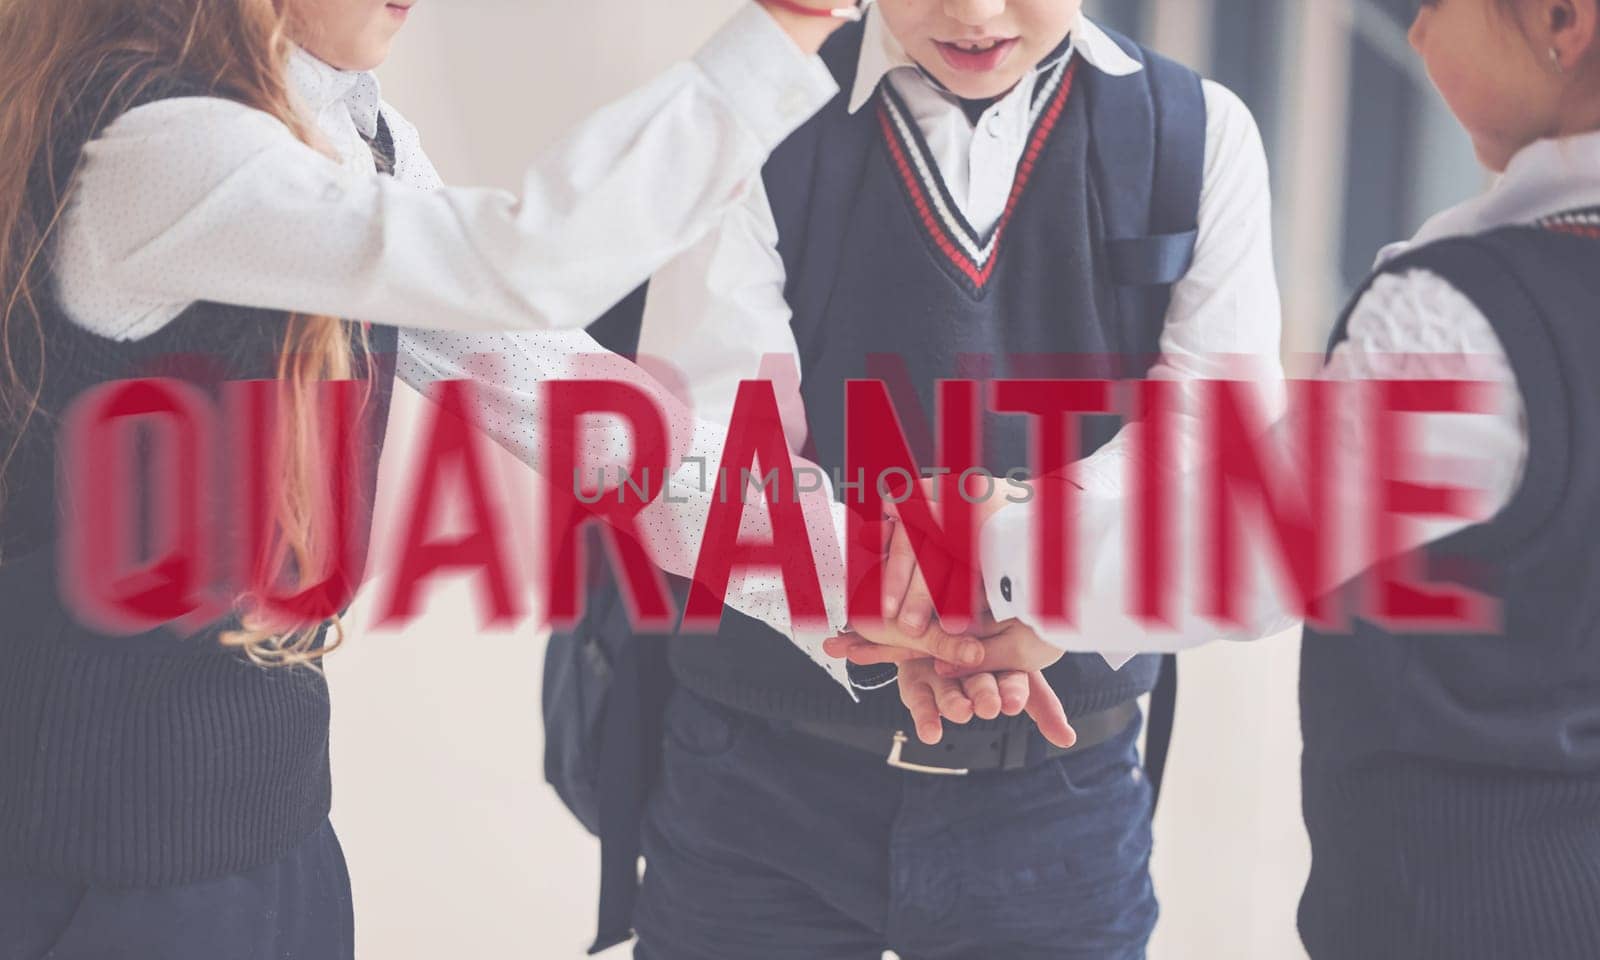 Red quarantine word. Group of kids in school uniform standing together indoors.